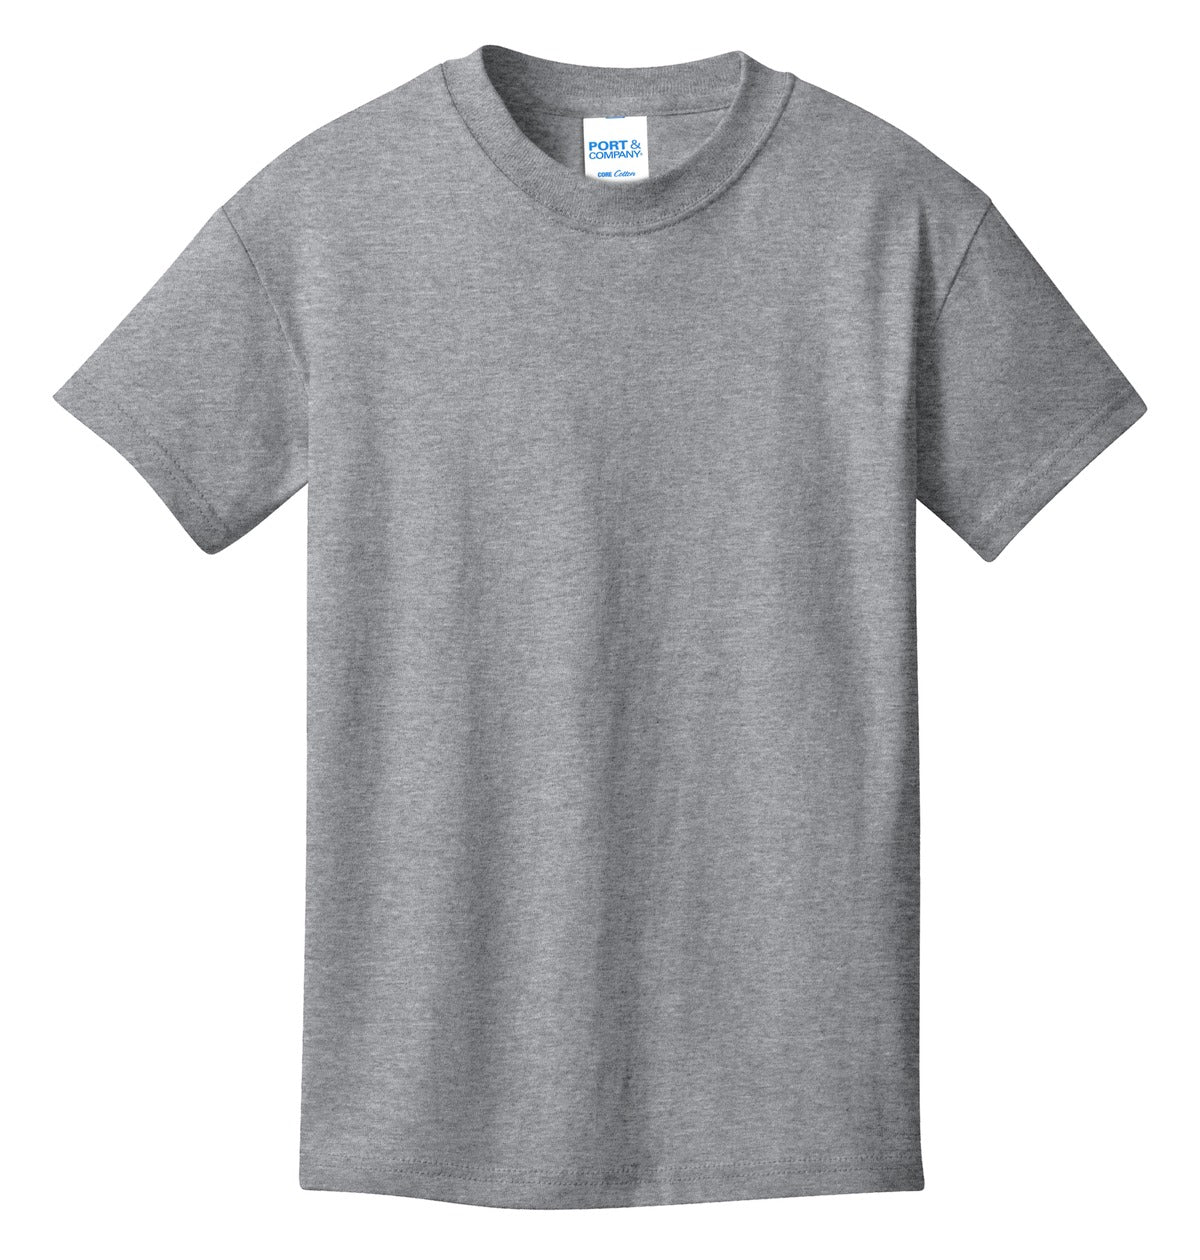 Port & Company - Youth Core Cotton Tee. PC54Y - Athletic Heather